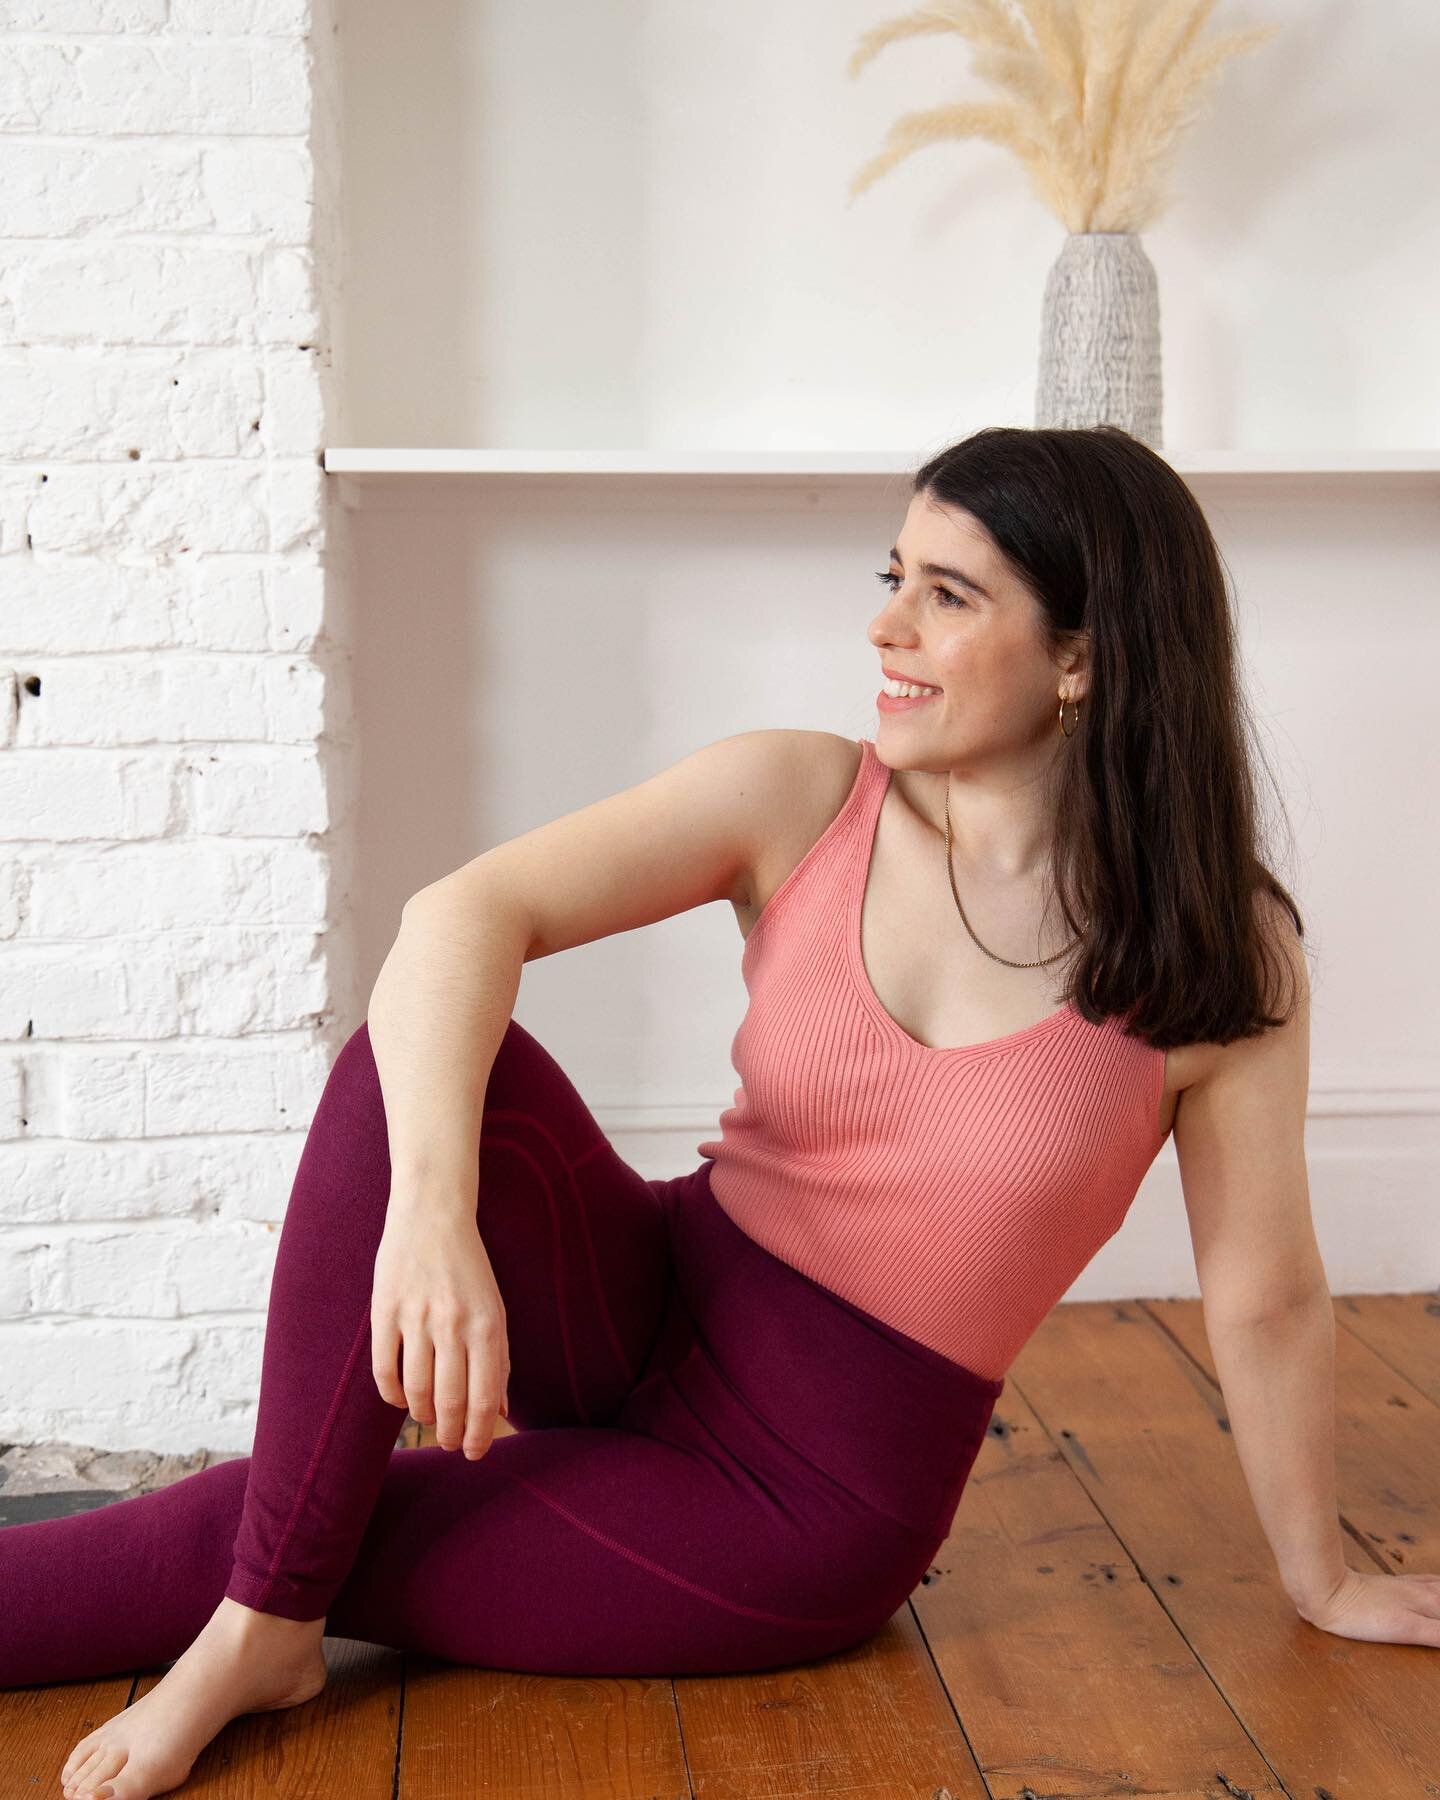 As a Pilates teacher my ✨why✨ is rooted in a deep desire to empower women to discover movement that not only feels good in their bodies but also nourishes their minds.

In a world full of people's opinions on women's bodies, I believe in an intuitive